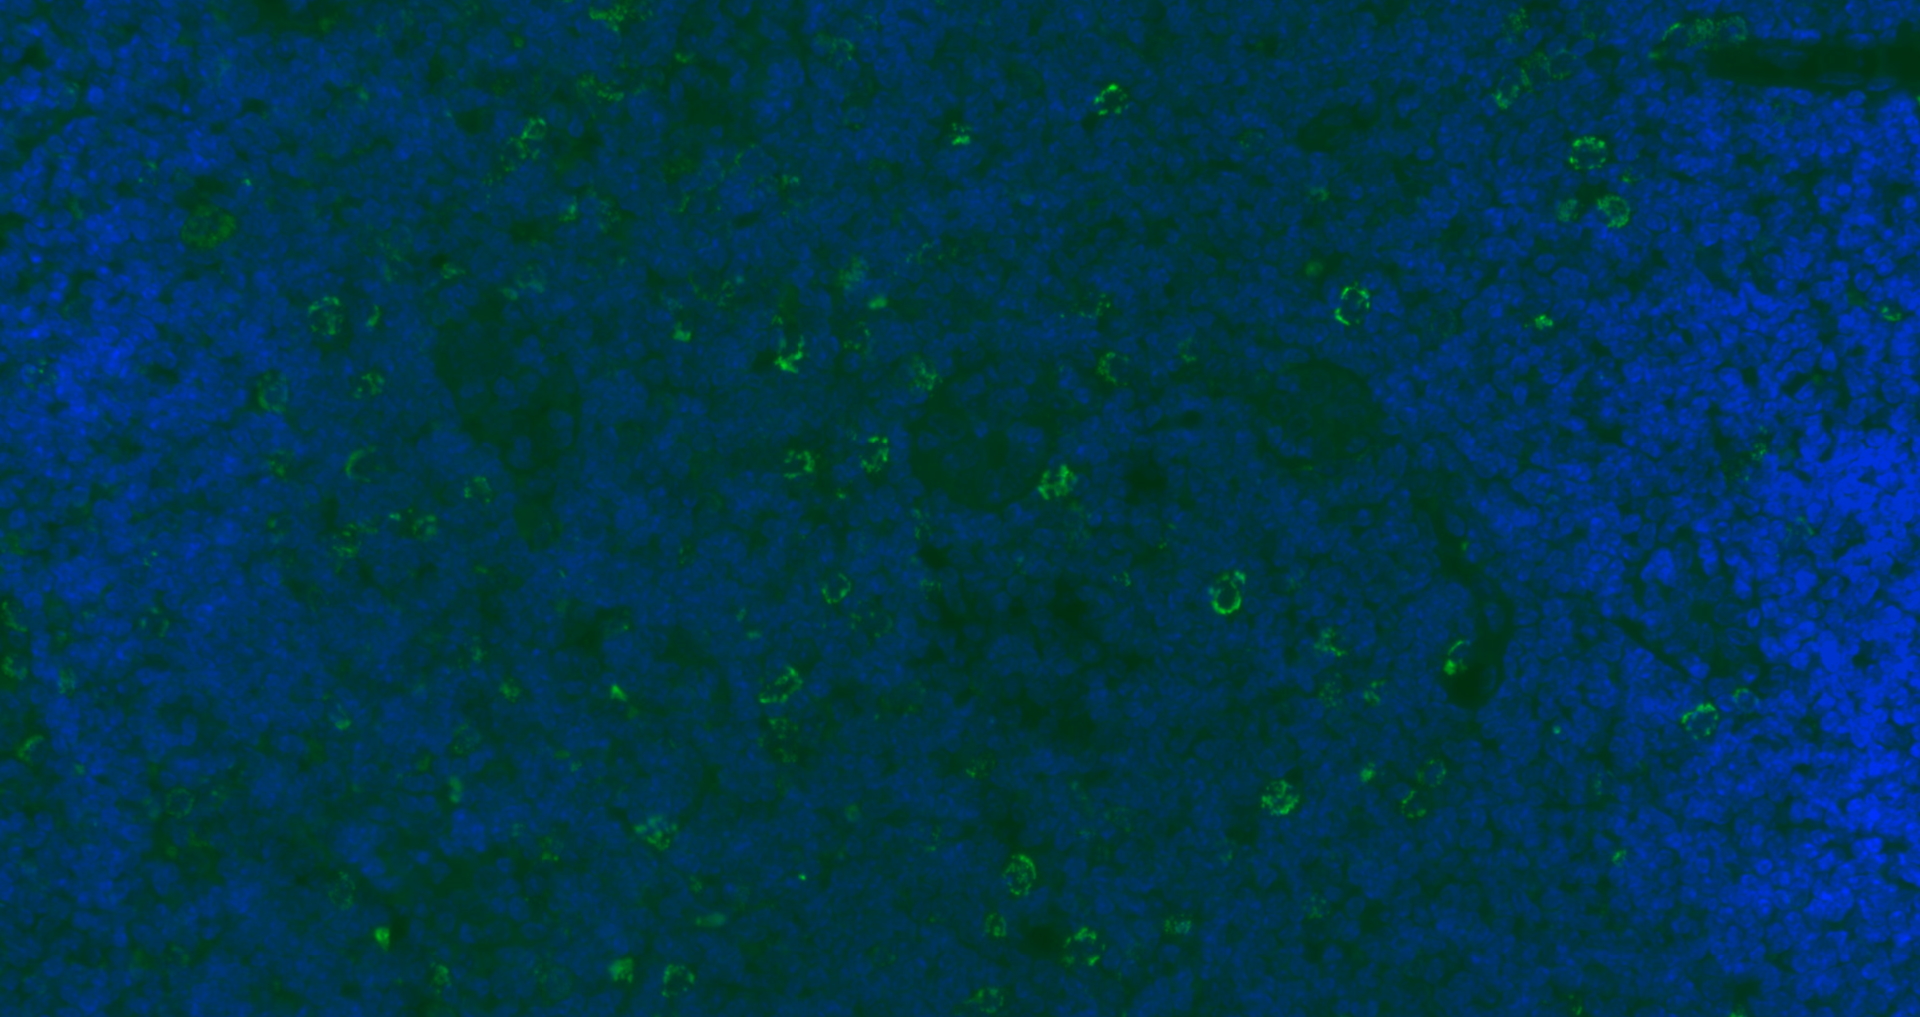 Paraformaldehyde-fixed, paraffin embedded Mouse lymph node; Antigen retrieval by boiling in sodium citrate buffer (pH6.0) for 15min; Blocking buffer (normal goat serum) at 37\u00b0C for 30min; Antibody incubation with CD8B Polyclonal Antibody, Unconjugated bs-4914R at 1:200 overnight at 4\u00b0C, followed by a conjugated Goat Anti-Rabbit IgG antibody (bs-0295G-AF488) for 90 minutes, and DAPI for nuclei staining.